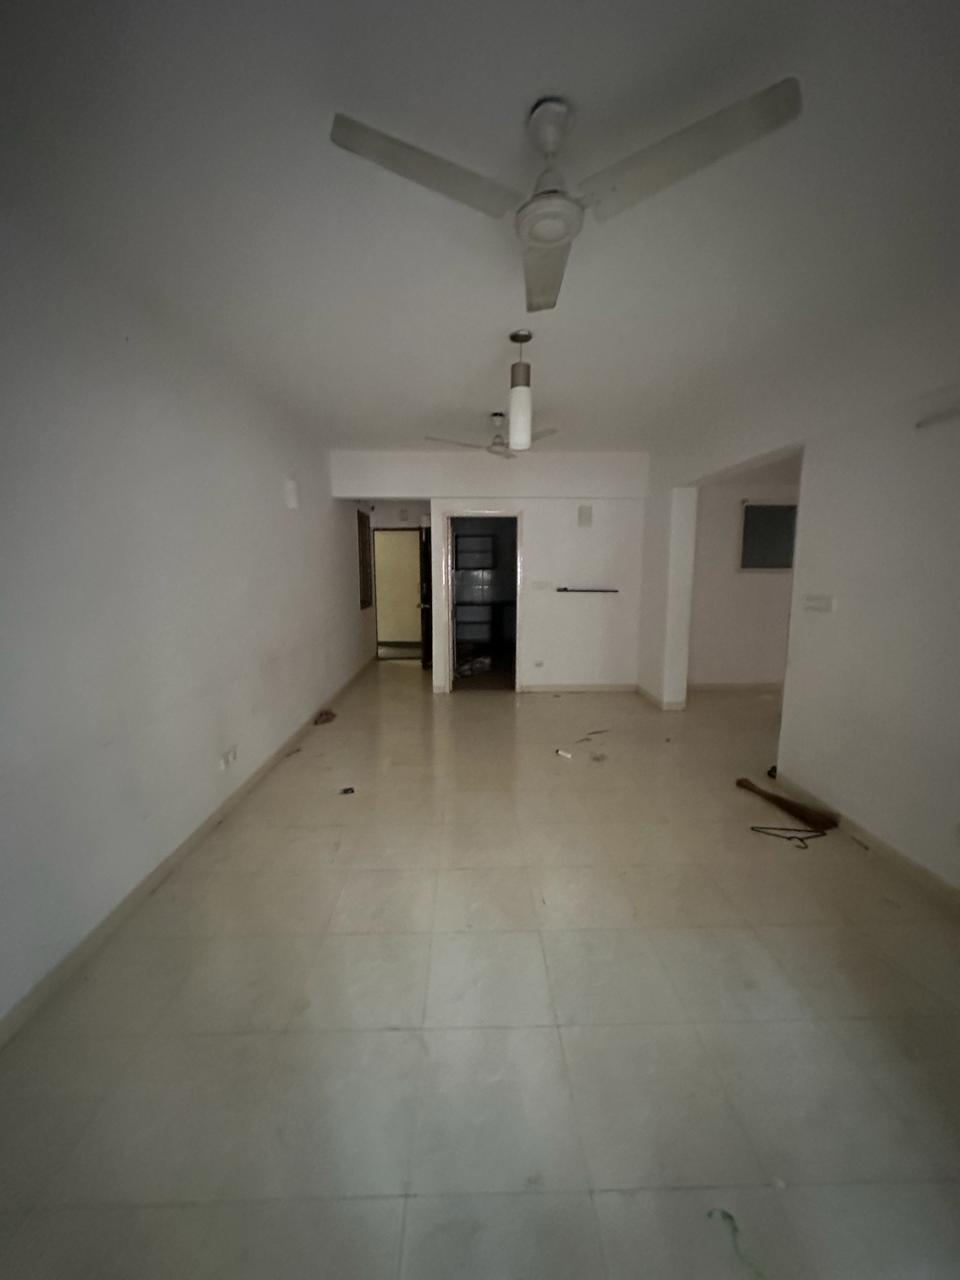 3 BHK Residential Apartment for Lease Only at JAM-6483 in Subbanna Palya